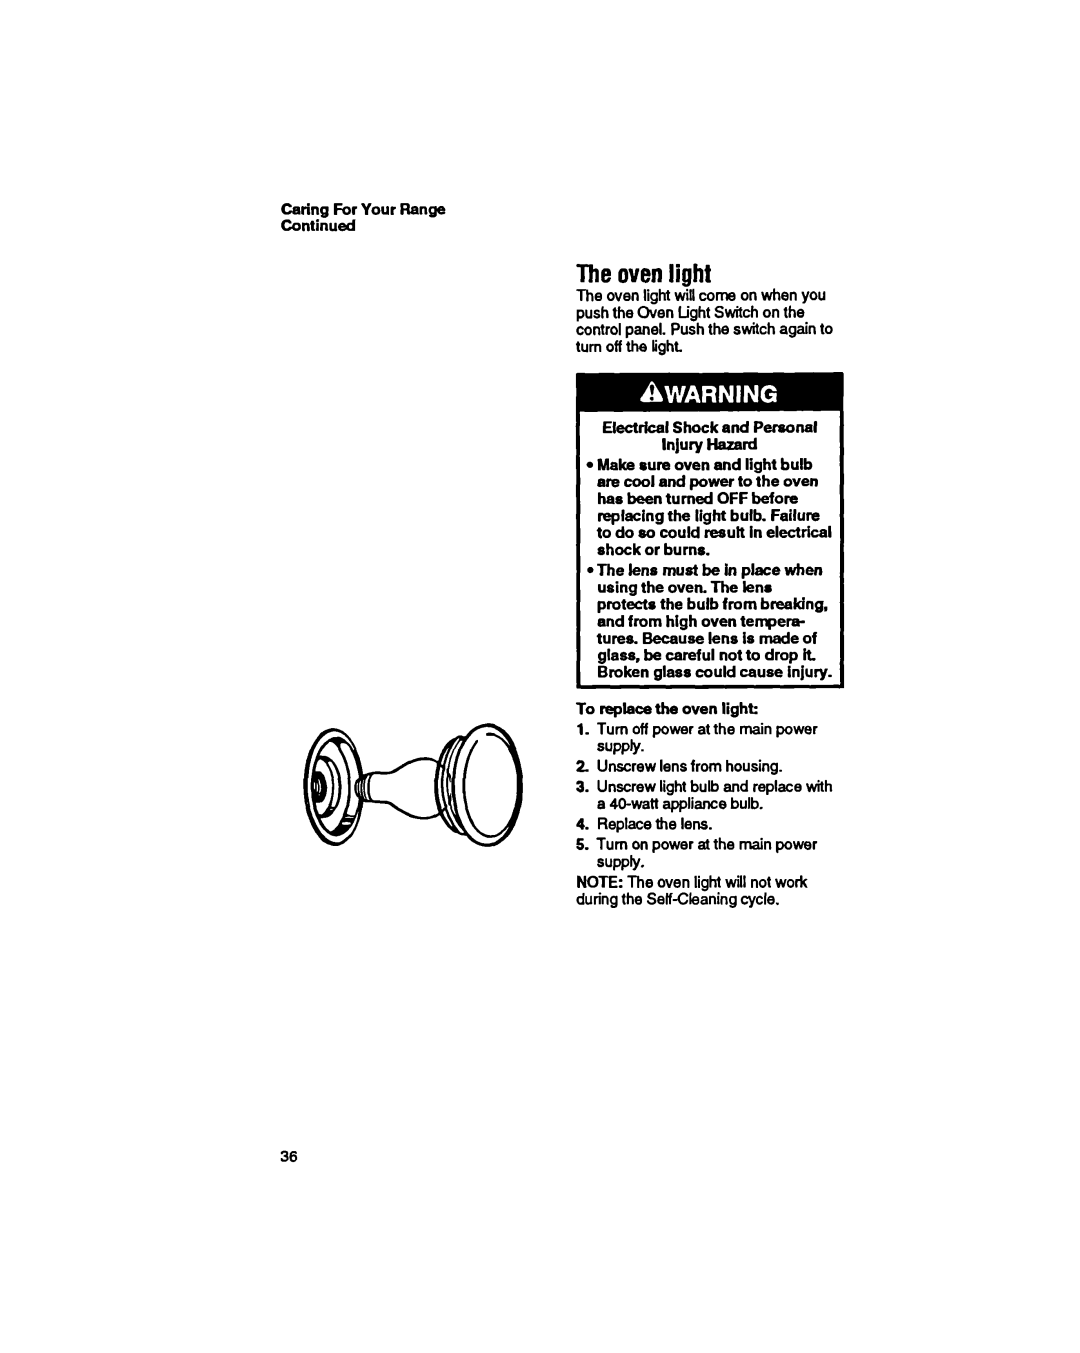 Whirlpool SS373PEX manual The ovenlight, Continued, Elect&al Shock and Pereonal Injury Hazard, To replace the oven light 